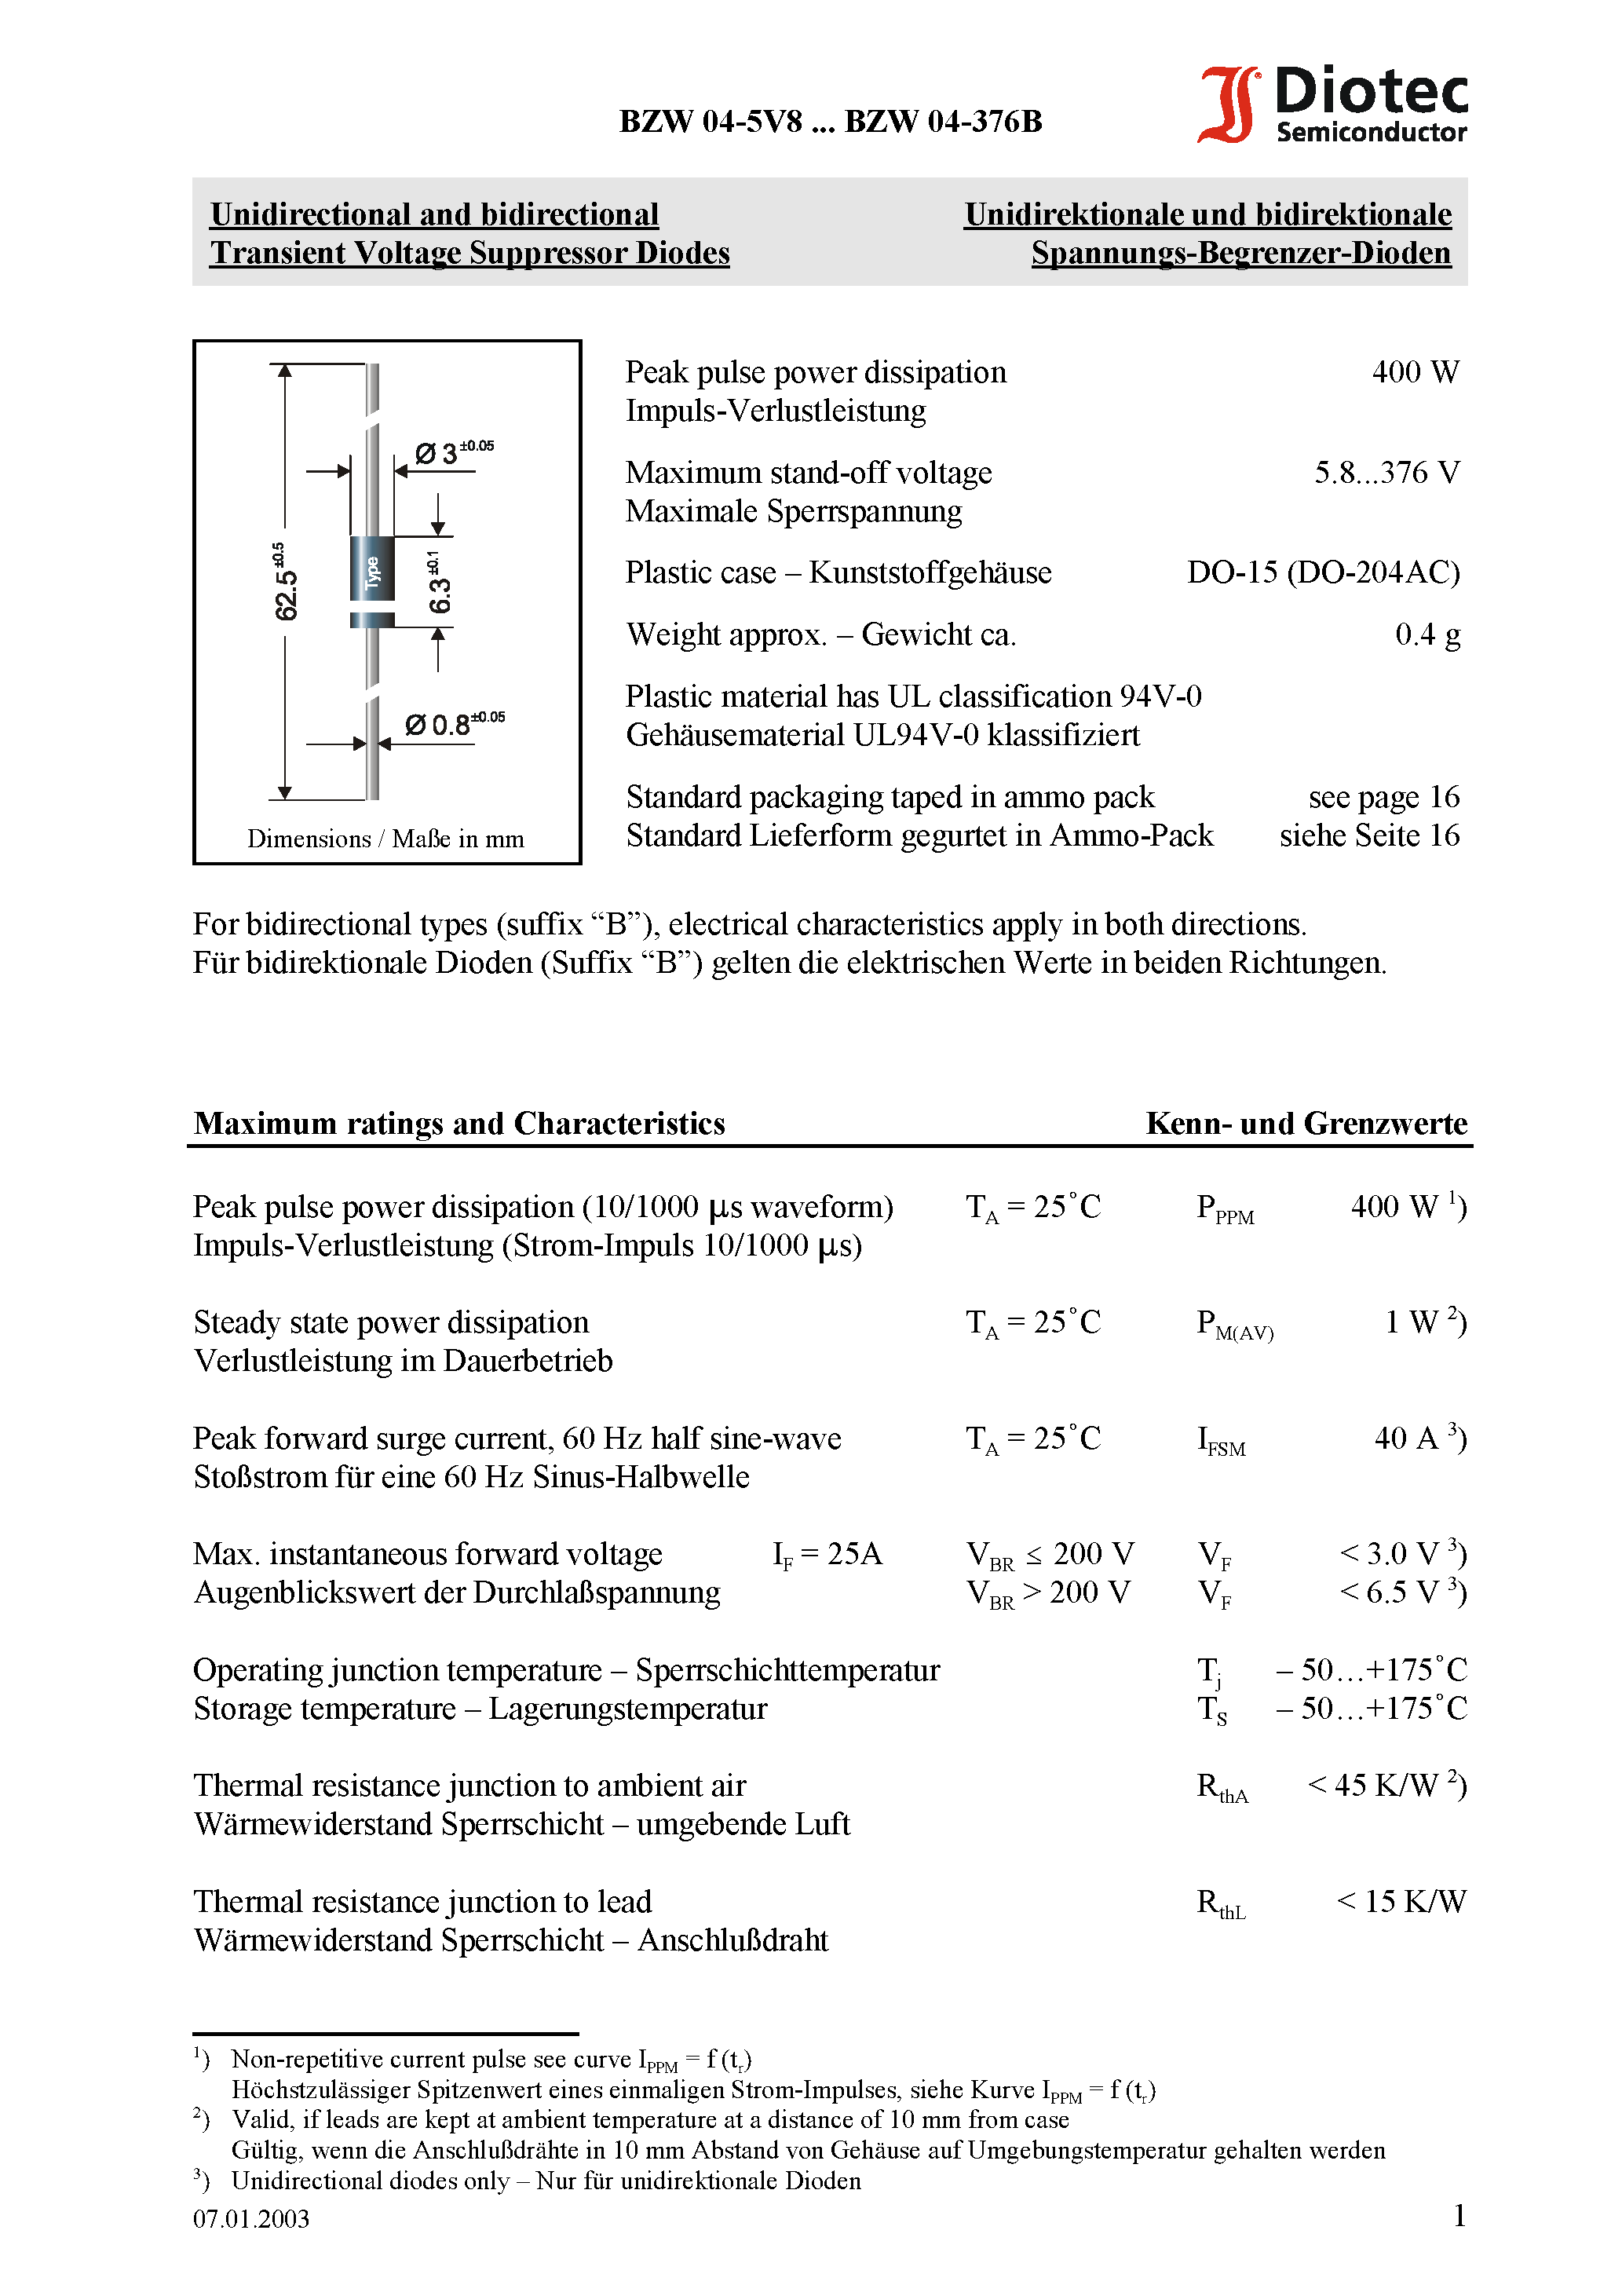 Datasheet BZW04-15 - Unidirectional and bidirectional Transient Voltage Suppressor Diodes page 1